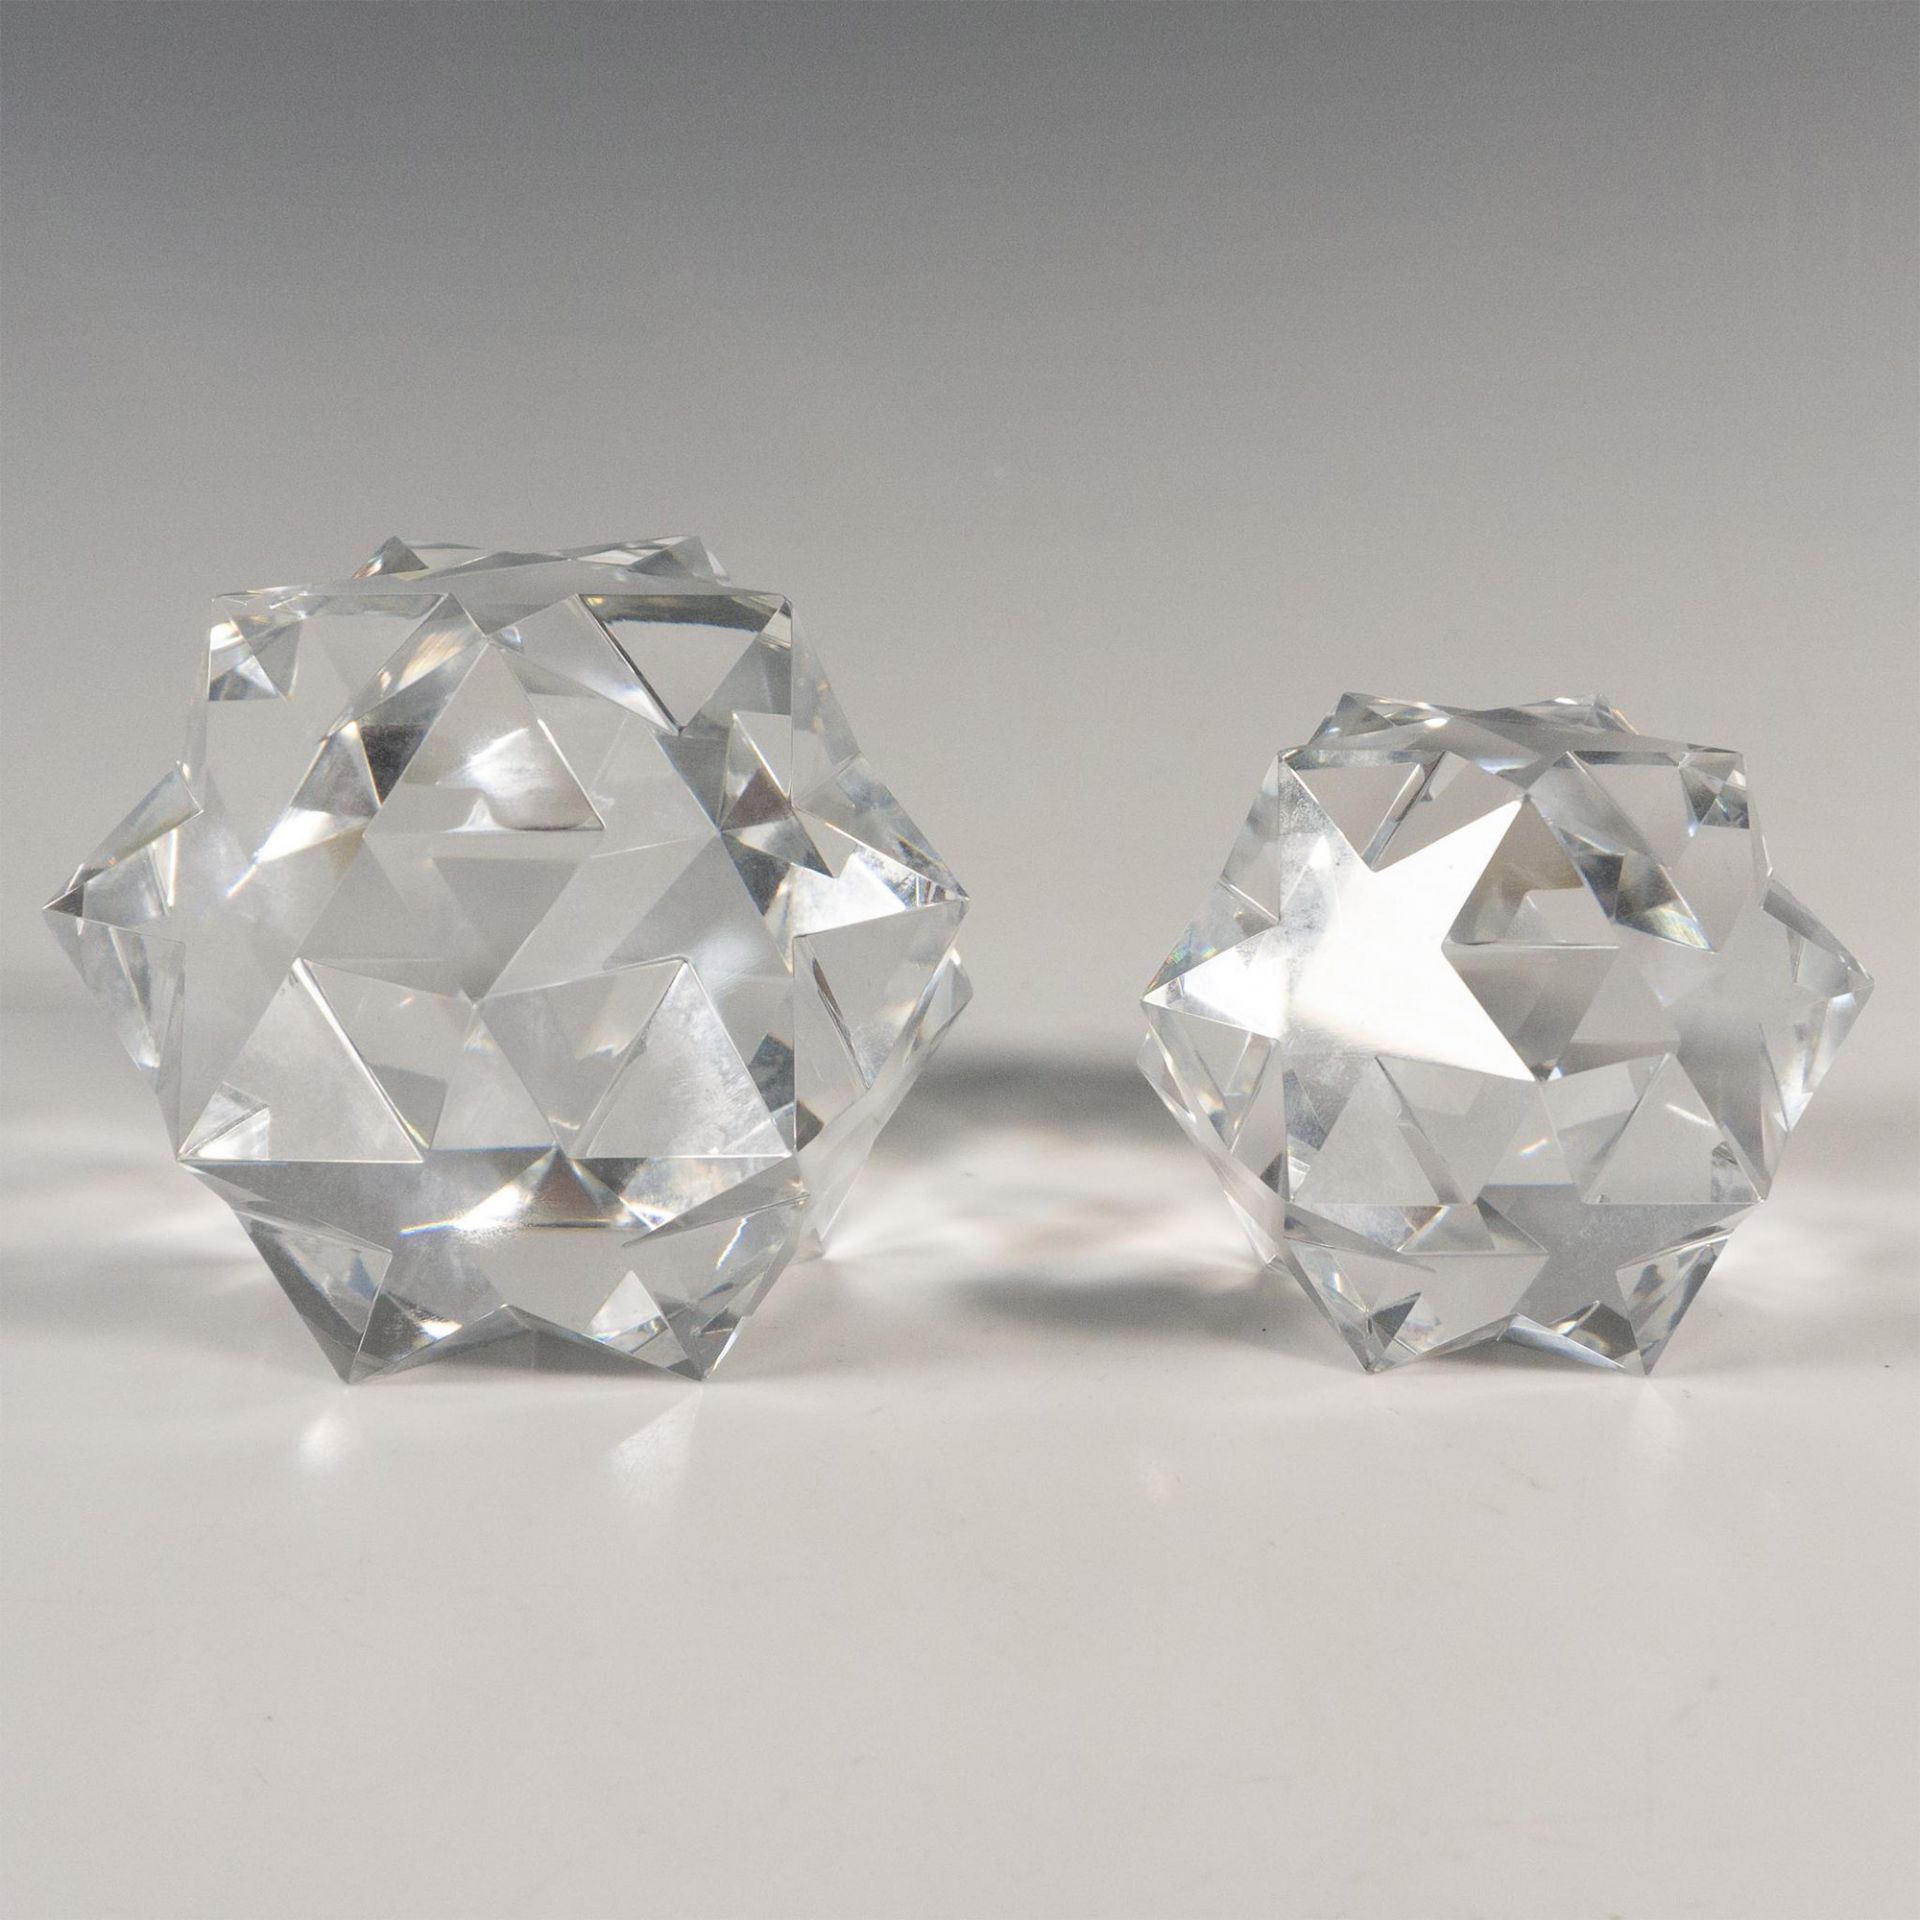 Pair of Star Dodecahedron Paperweights - Bild 2 aus 3